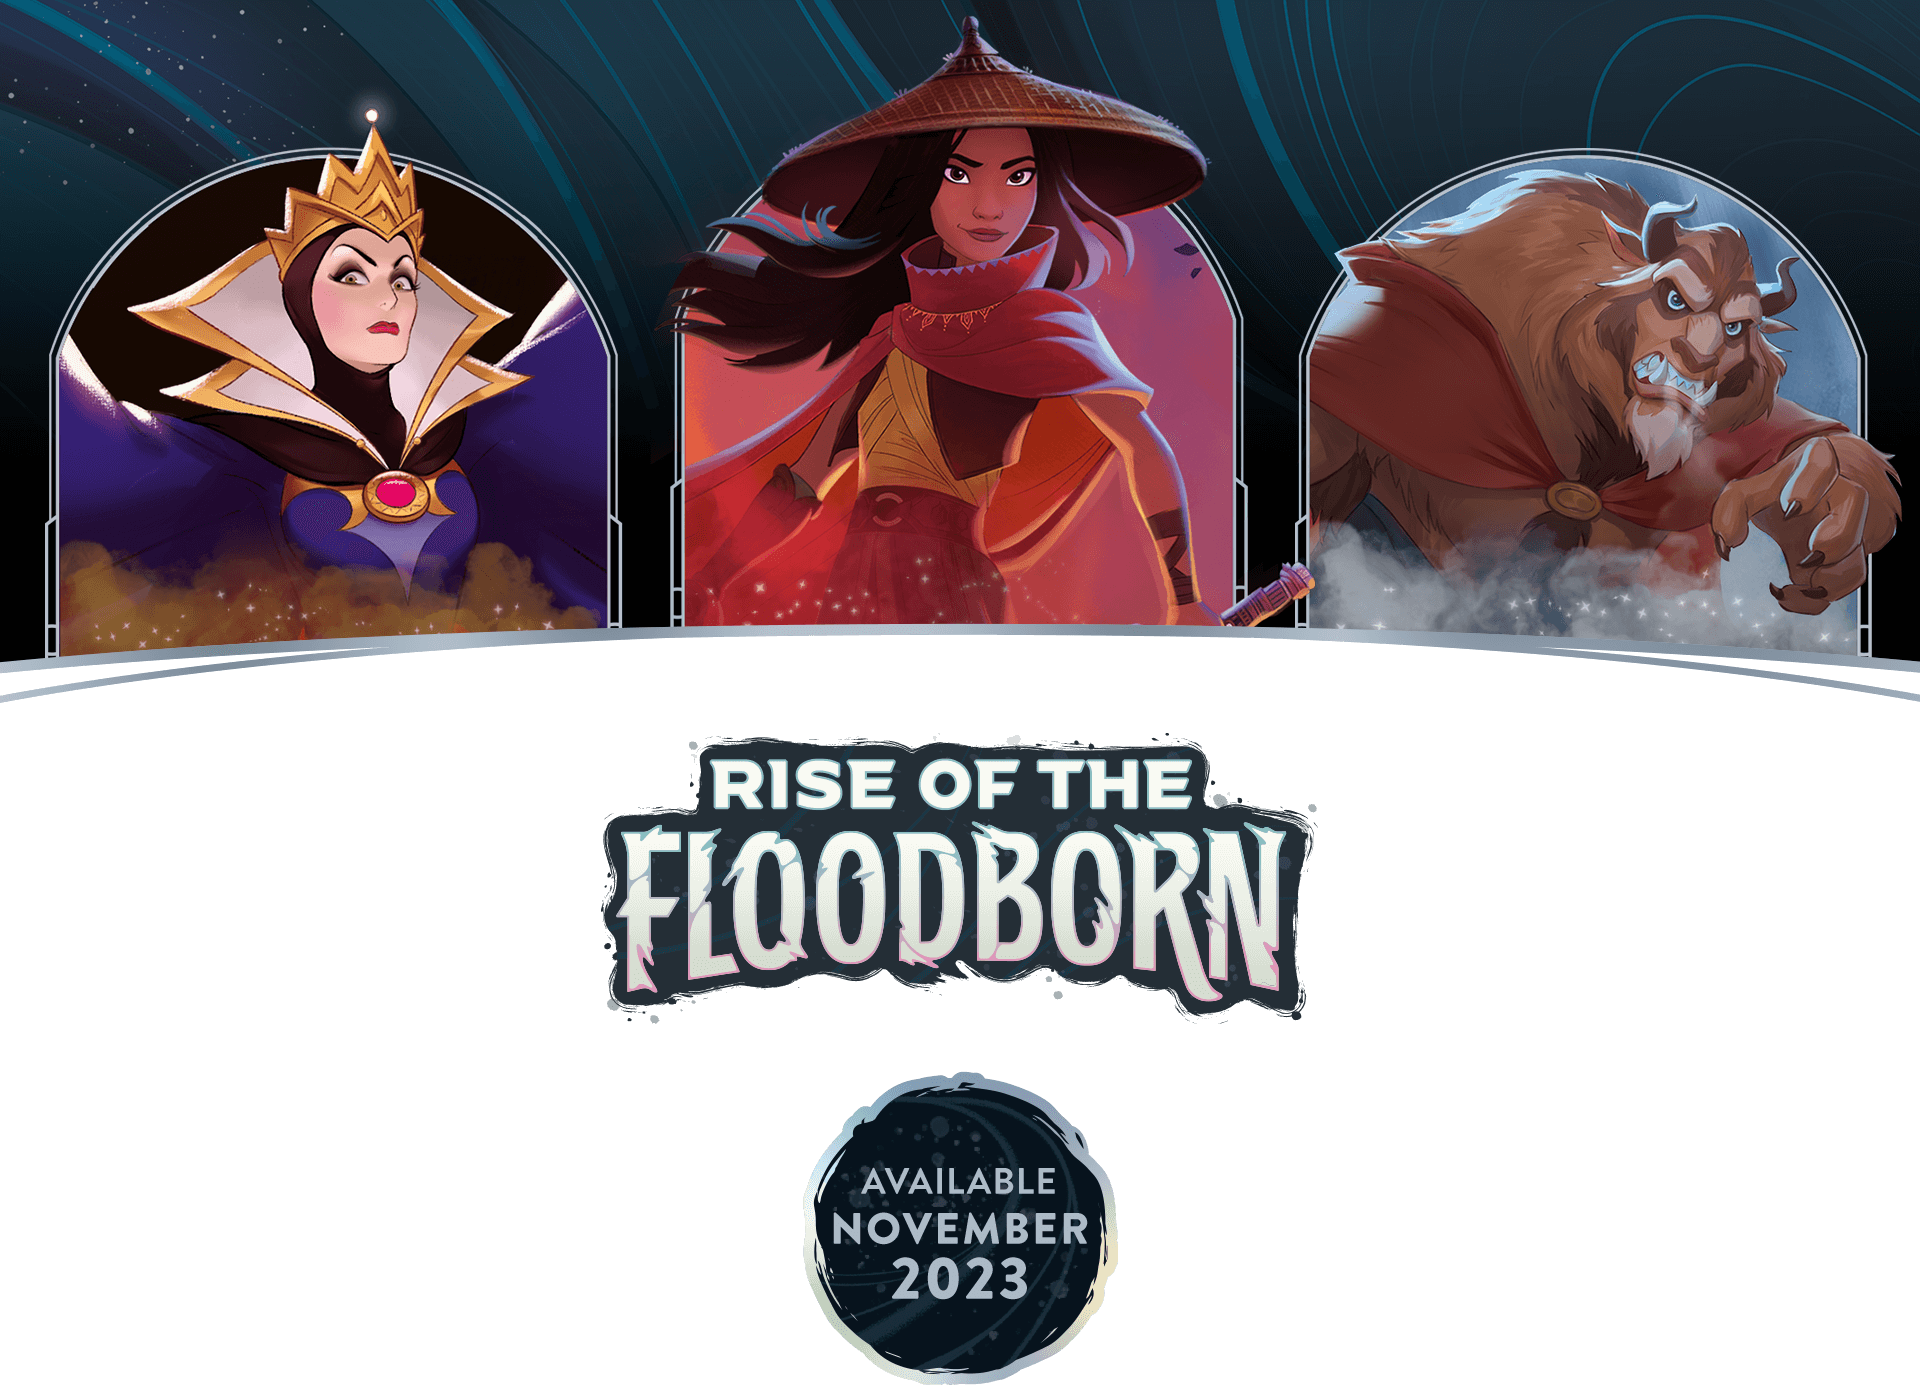 Decorative header image showing three characters (left to right: The Queen, Raya, Beast) and a logo that says RISE OF THE FLOODBORN